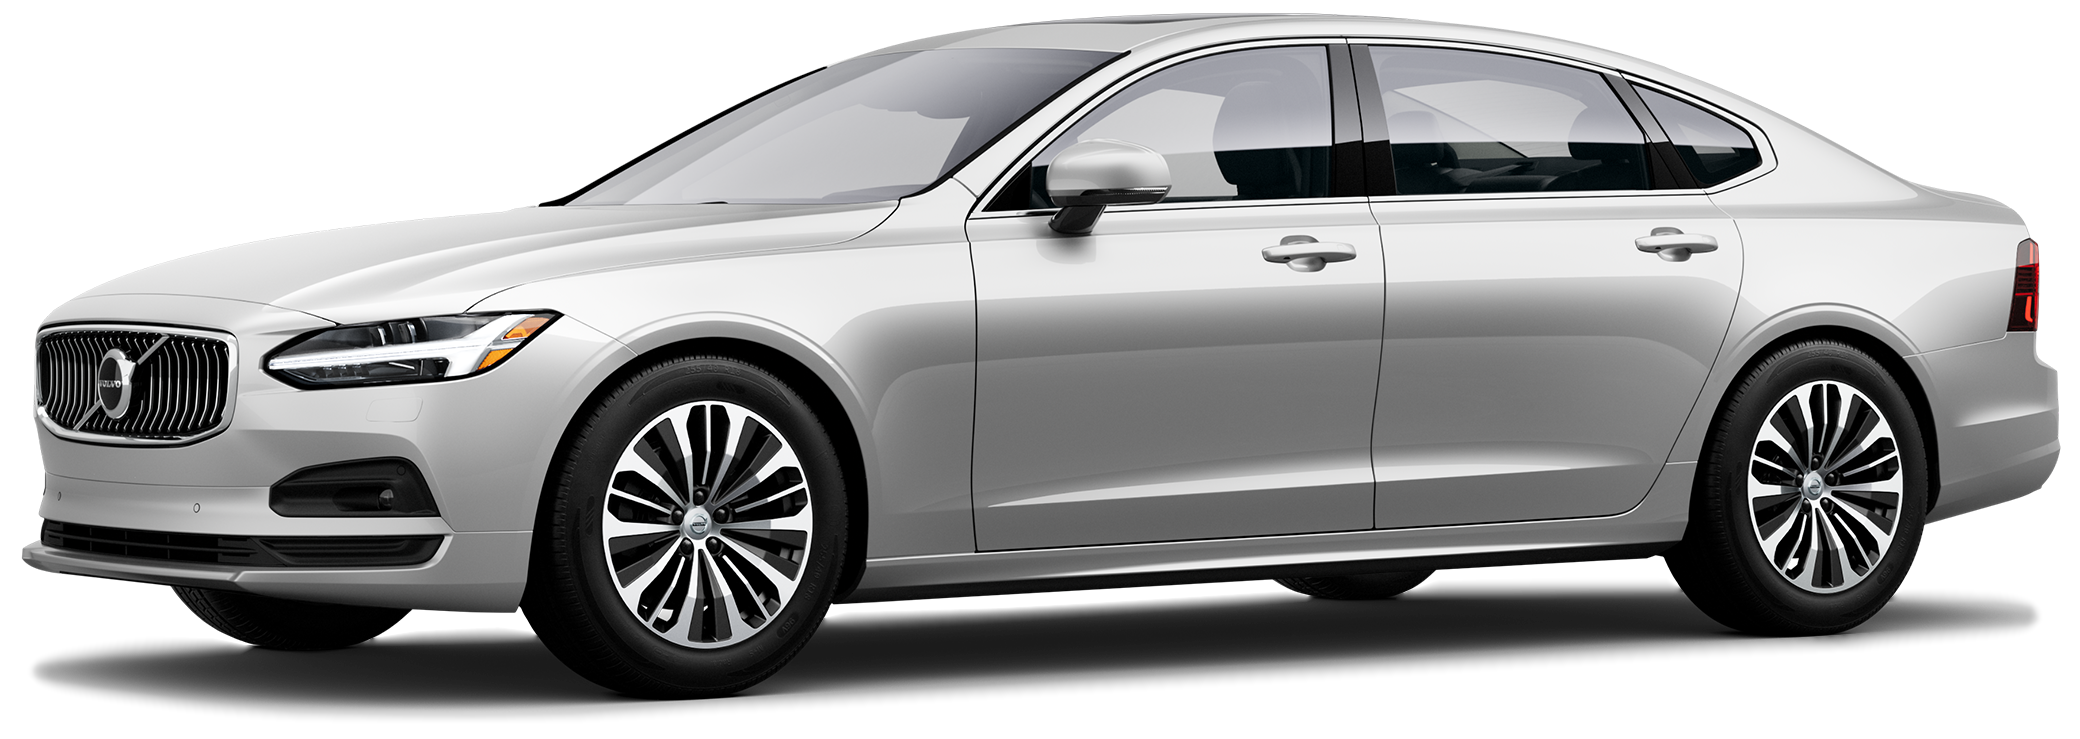 2021 Volvo S90 Incentives, Specials & Offers in White Marsh MD